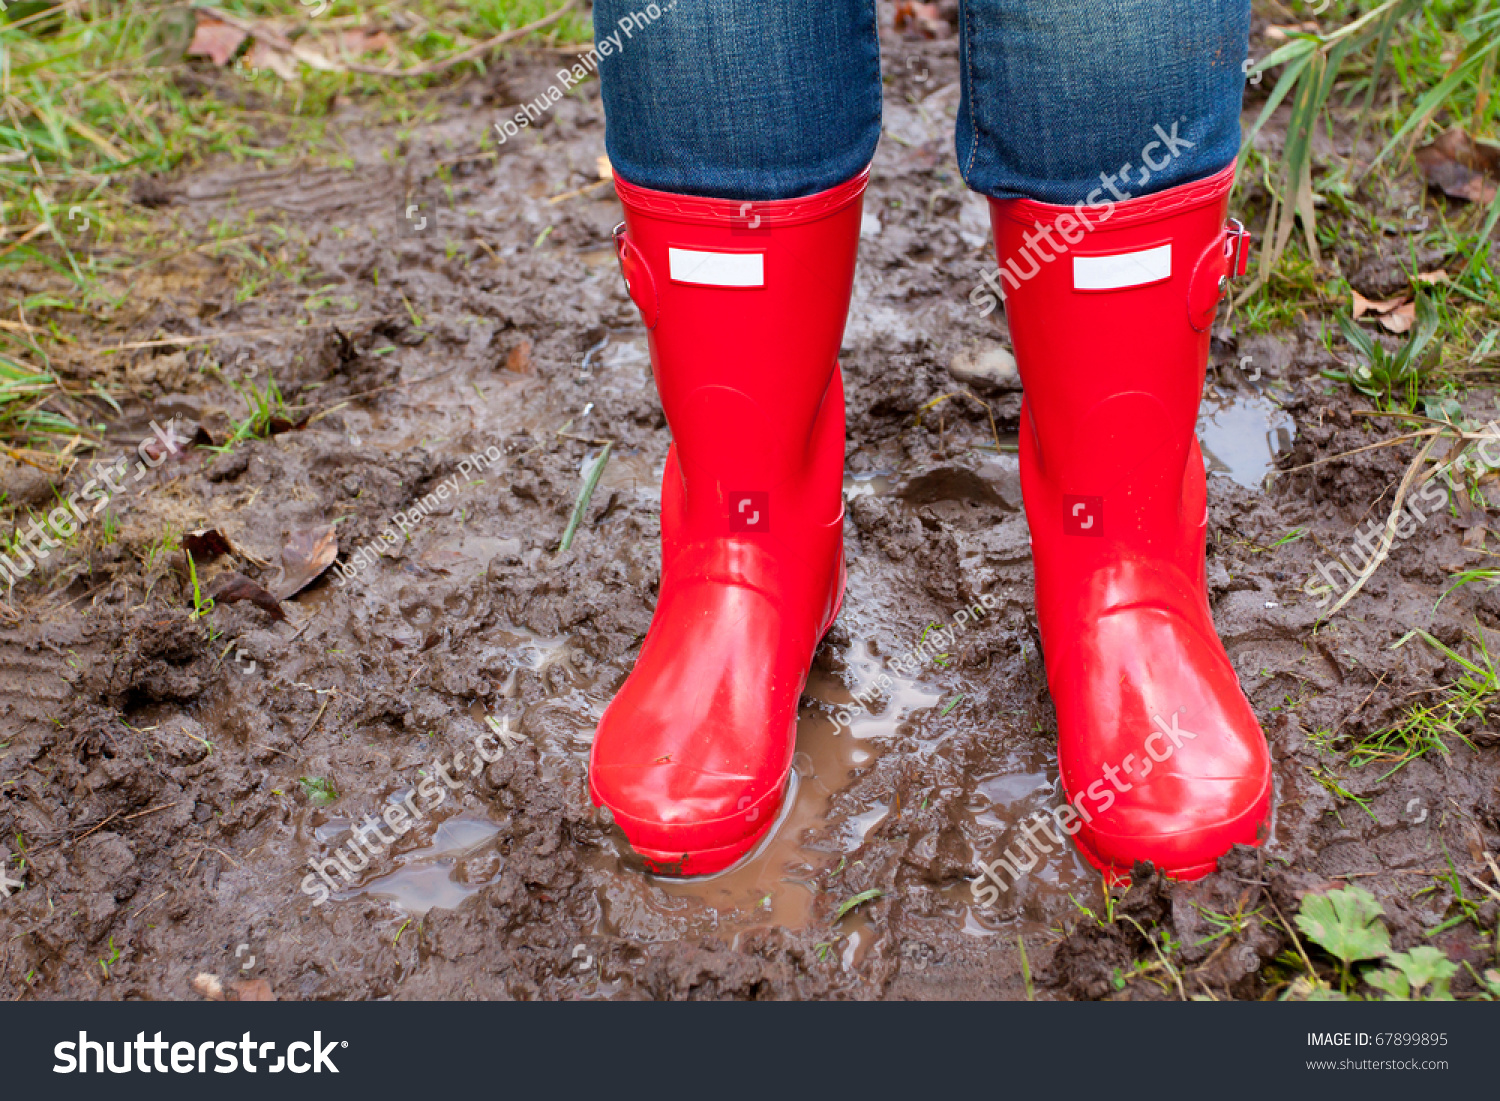 Bright Shining Clean Red Rain Boots Stock Photo 67899895 - Shutterstock